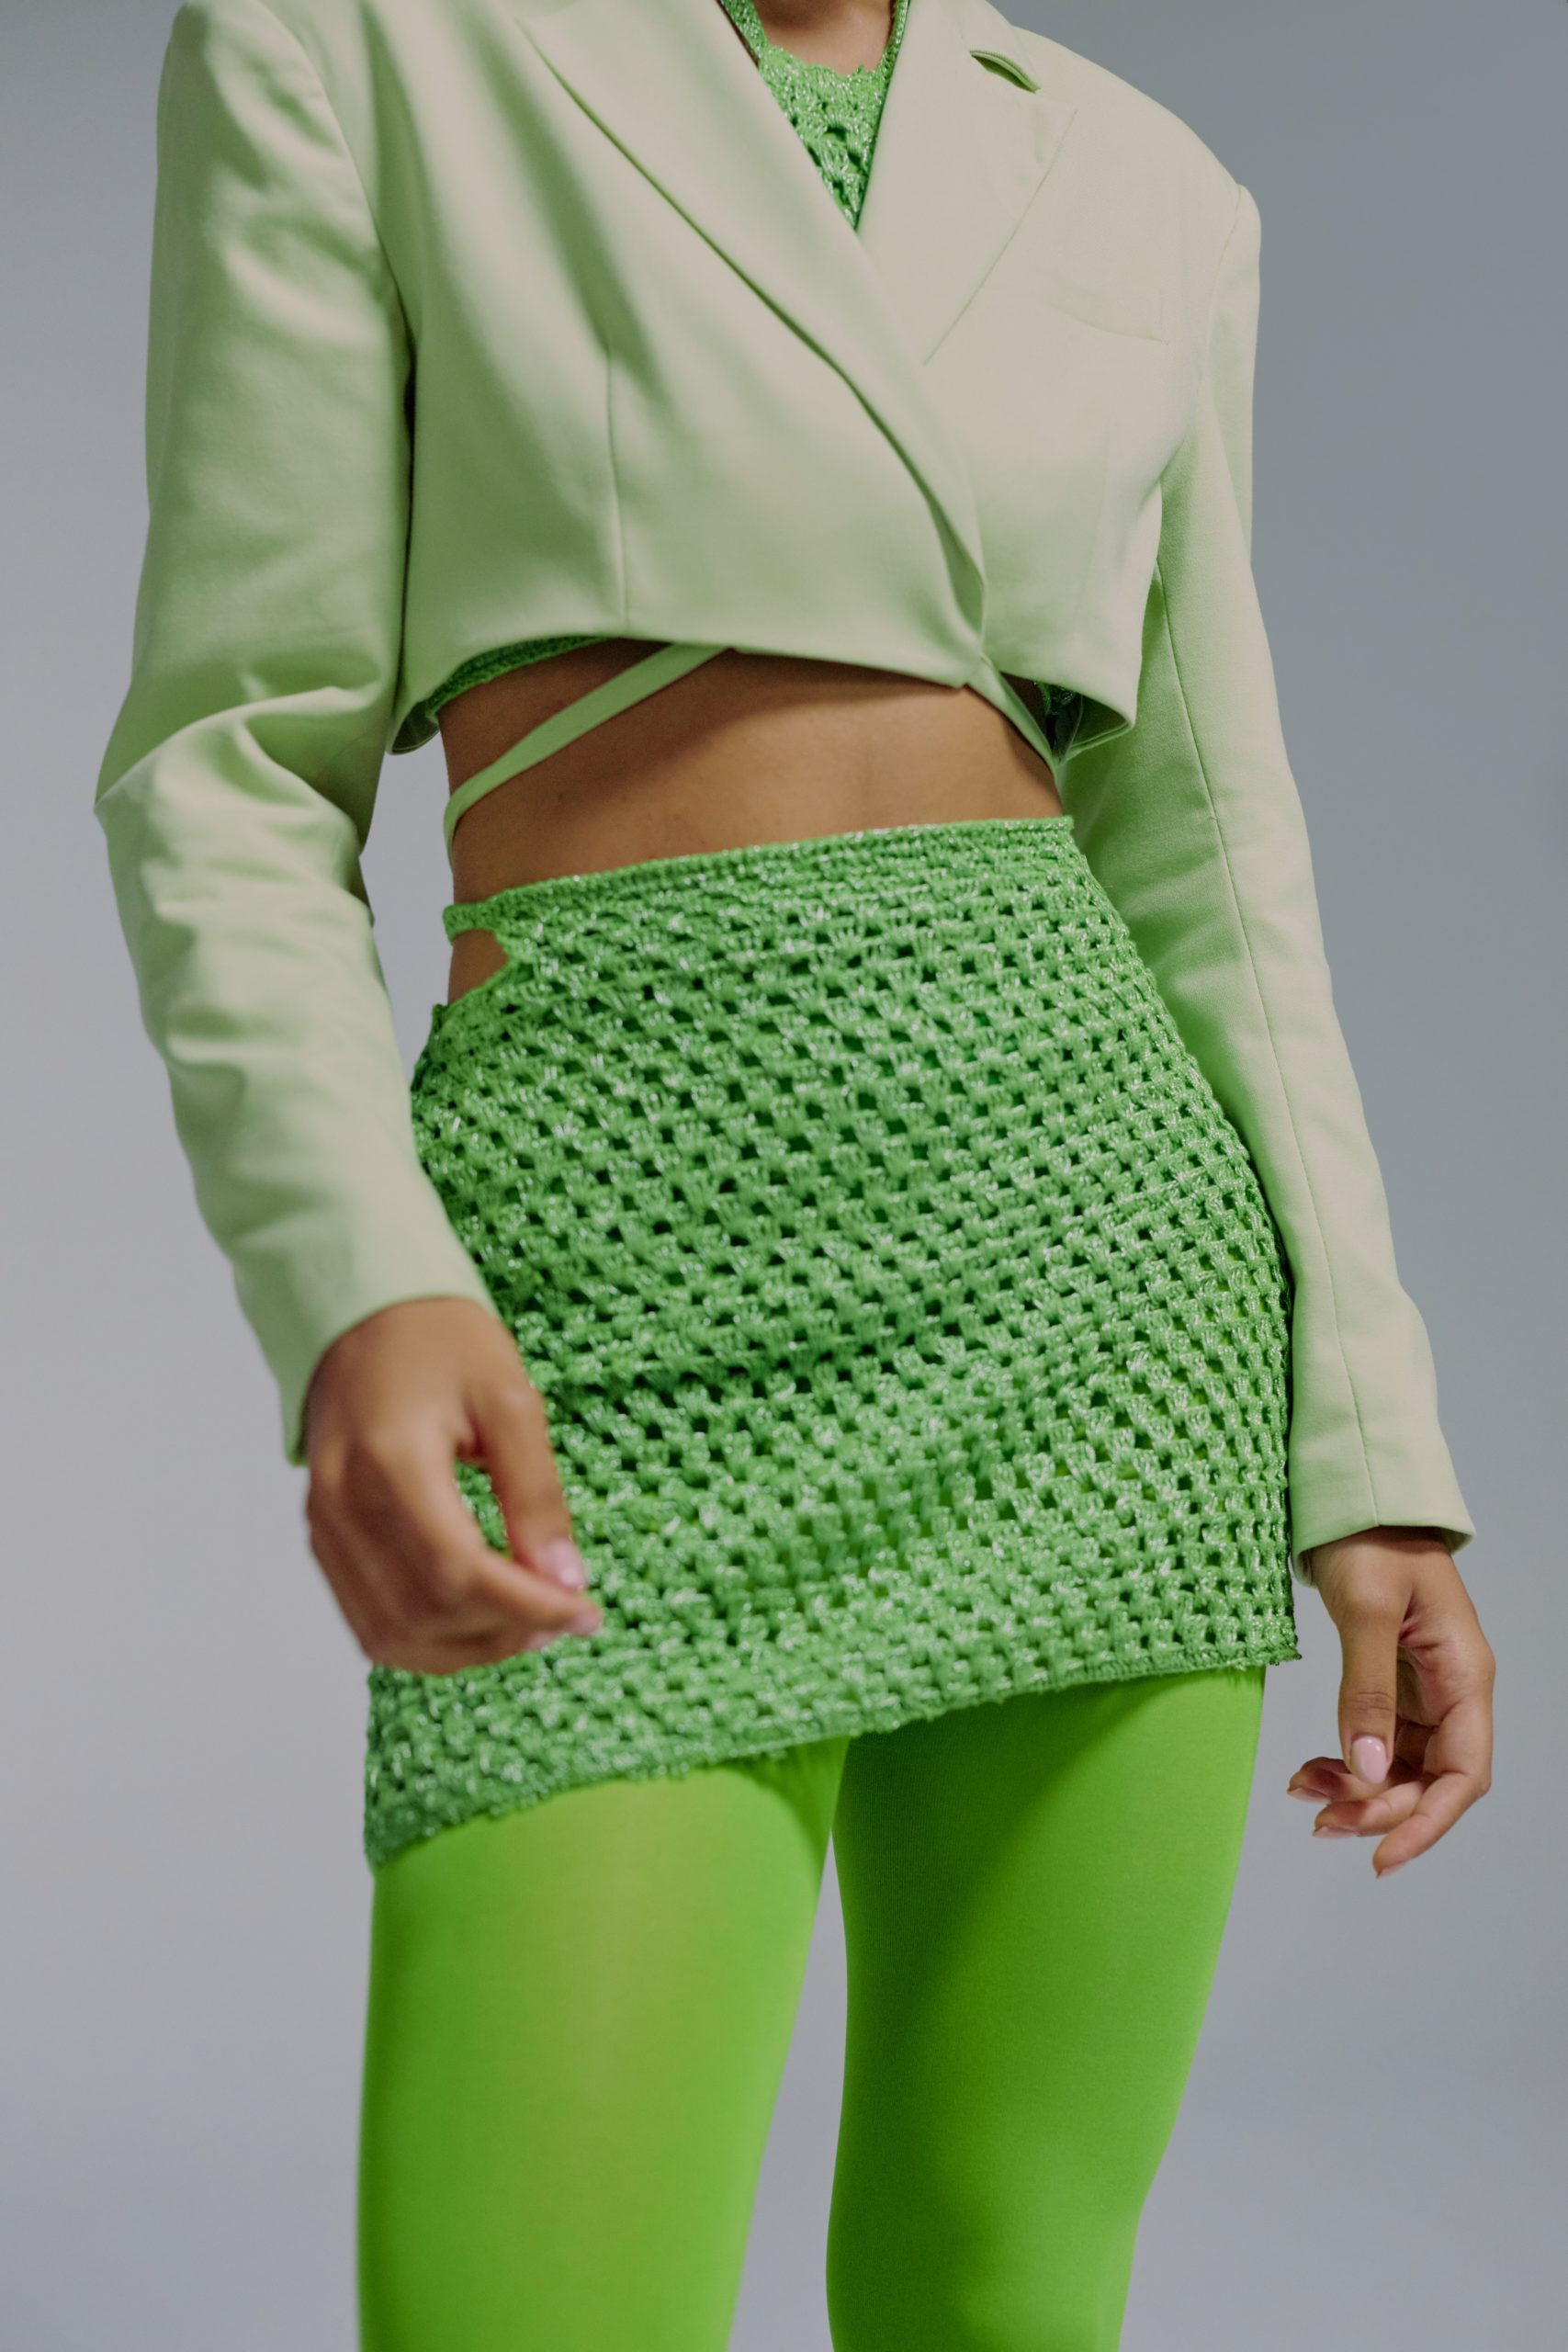 a headless picture of a woman wearing a green mini skirt above leggings